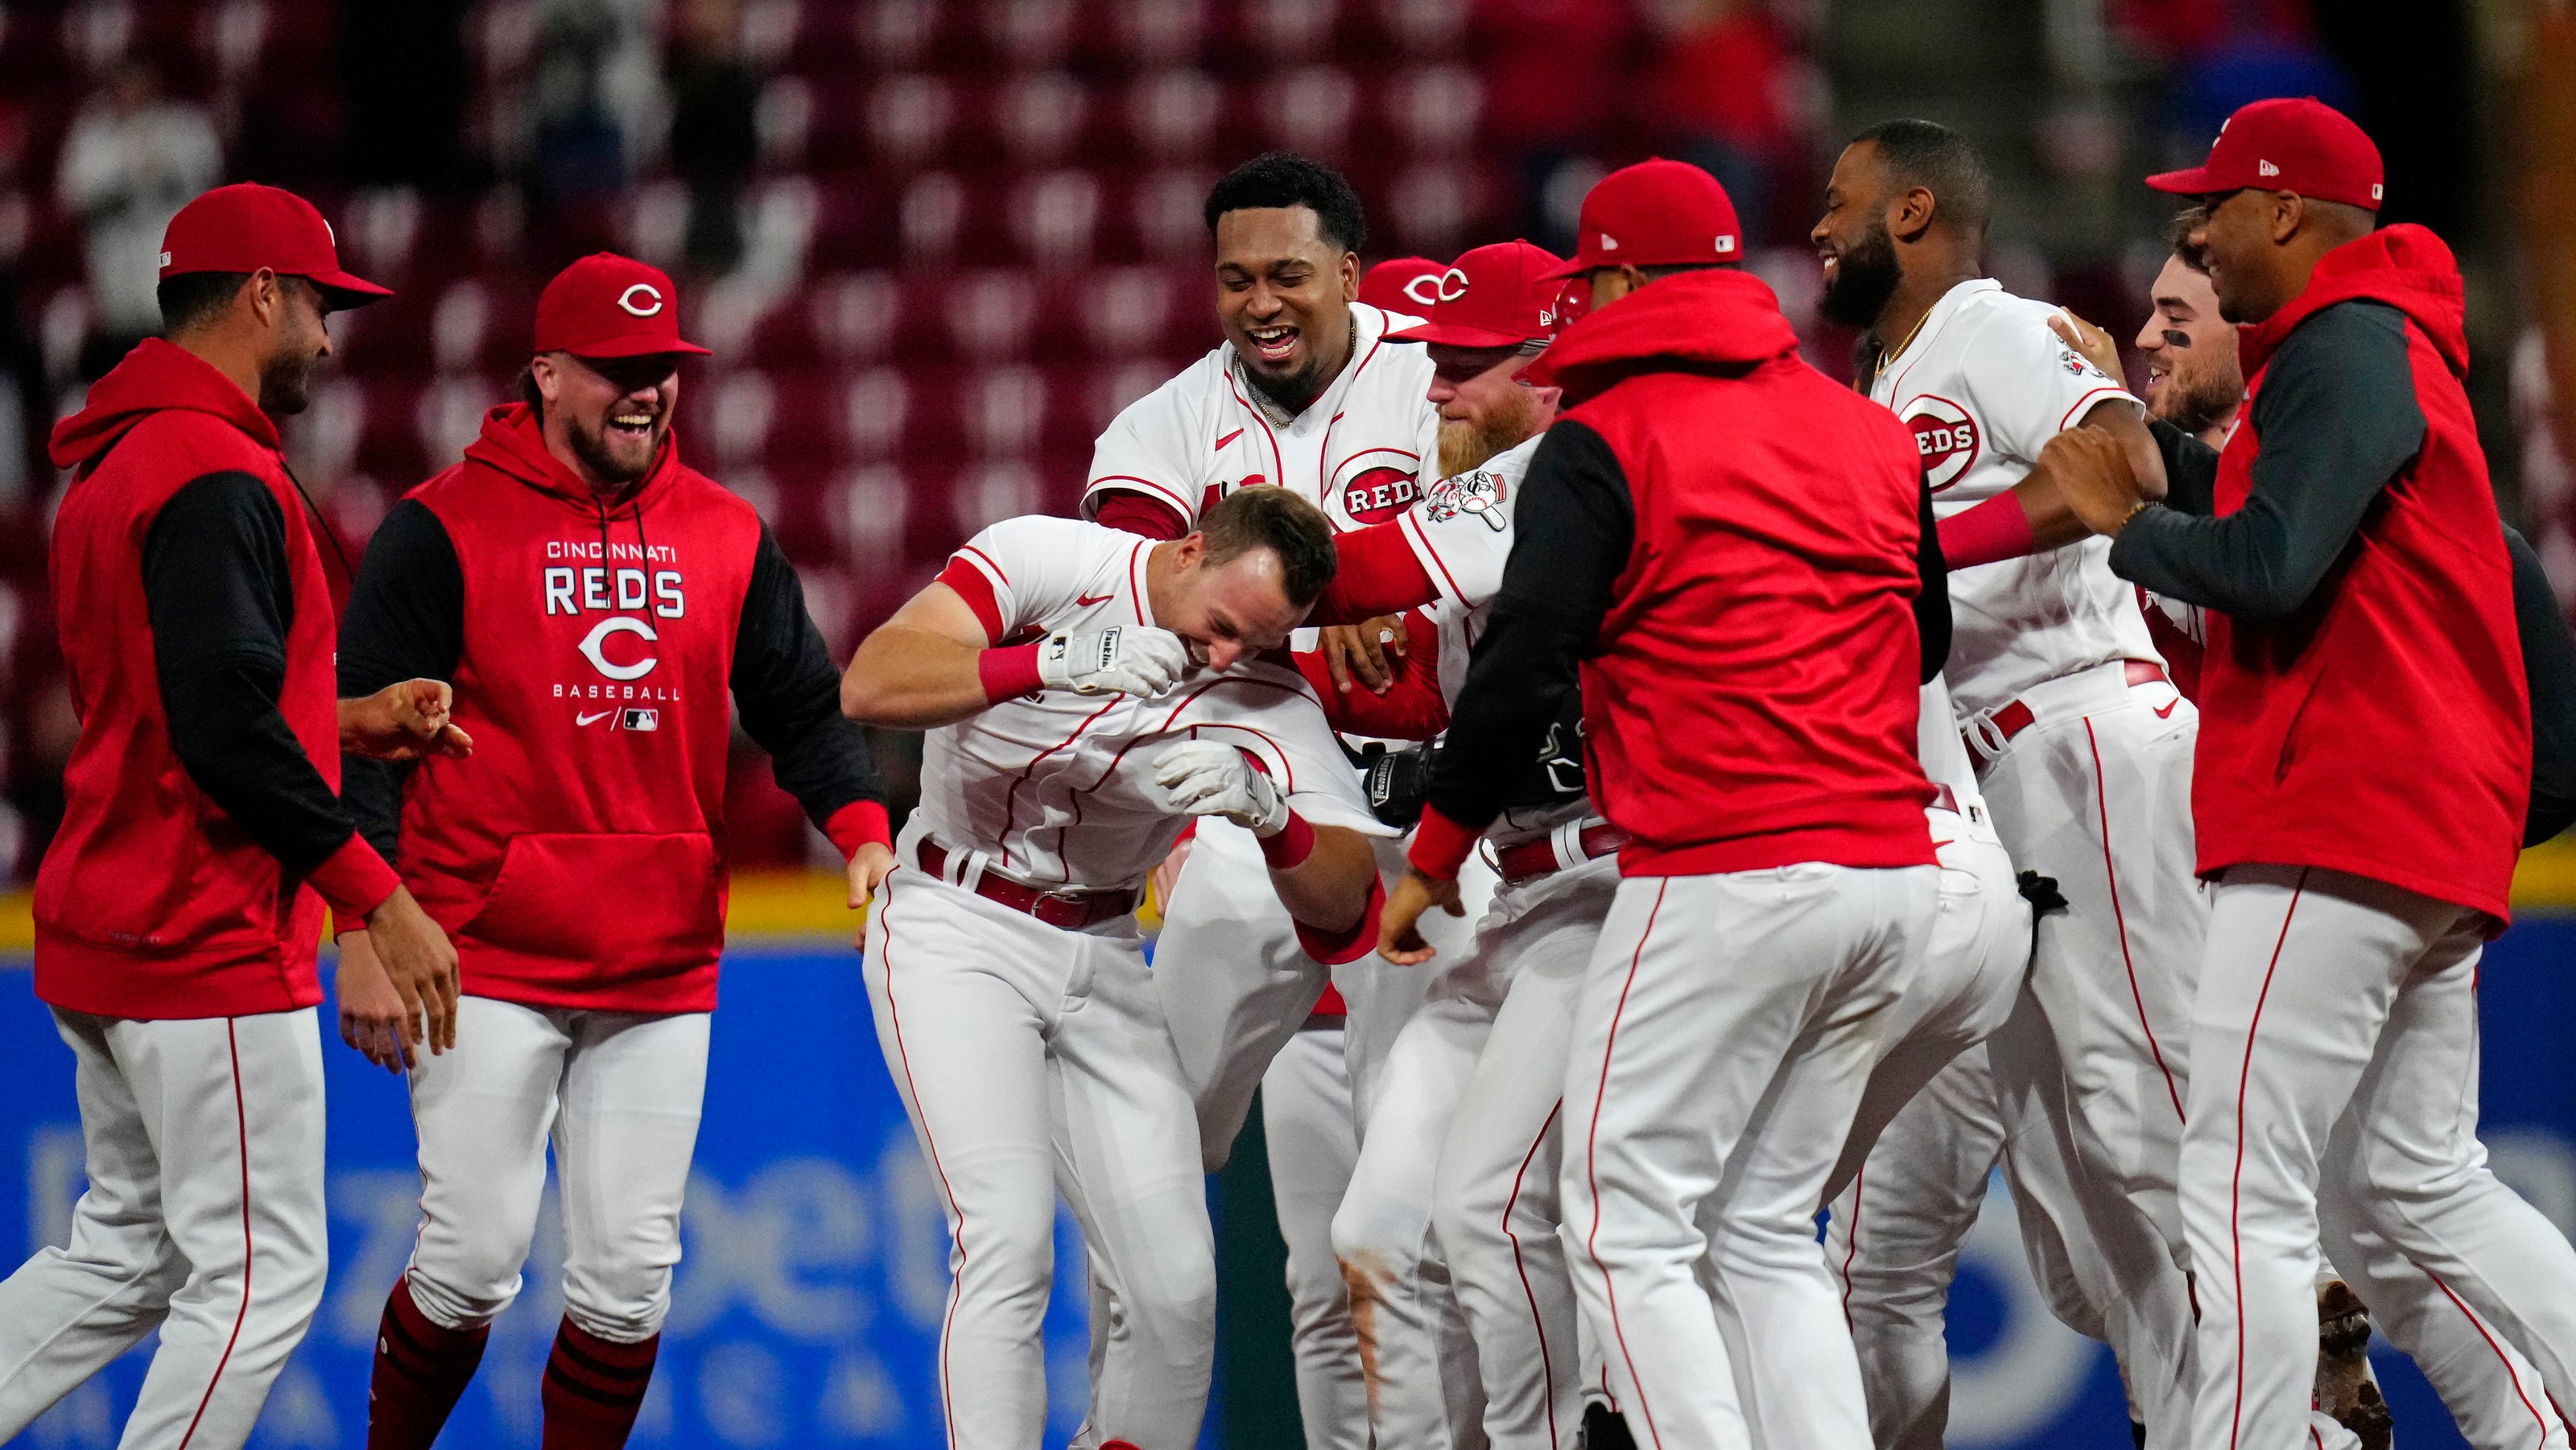 Cincinnati Reds hold off 100 losses with walkoff win over Cubs